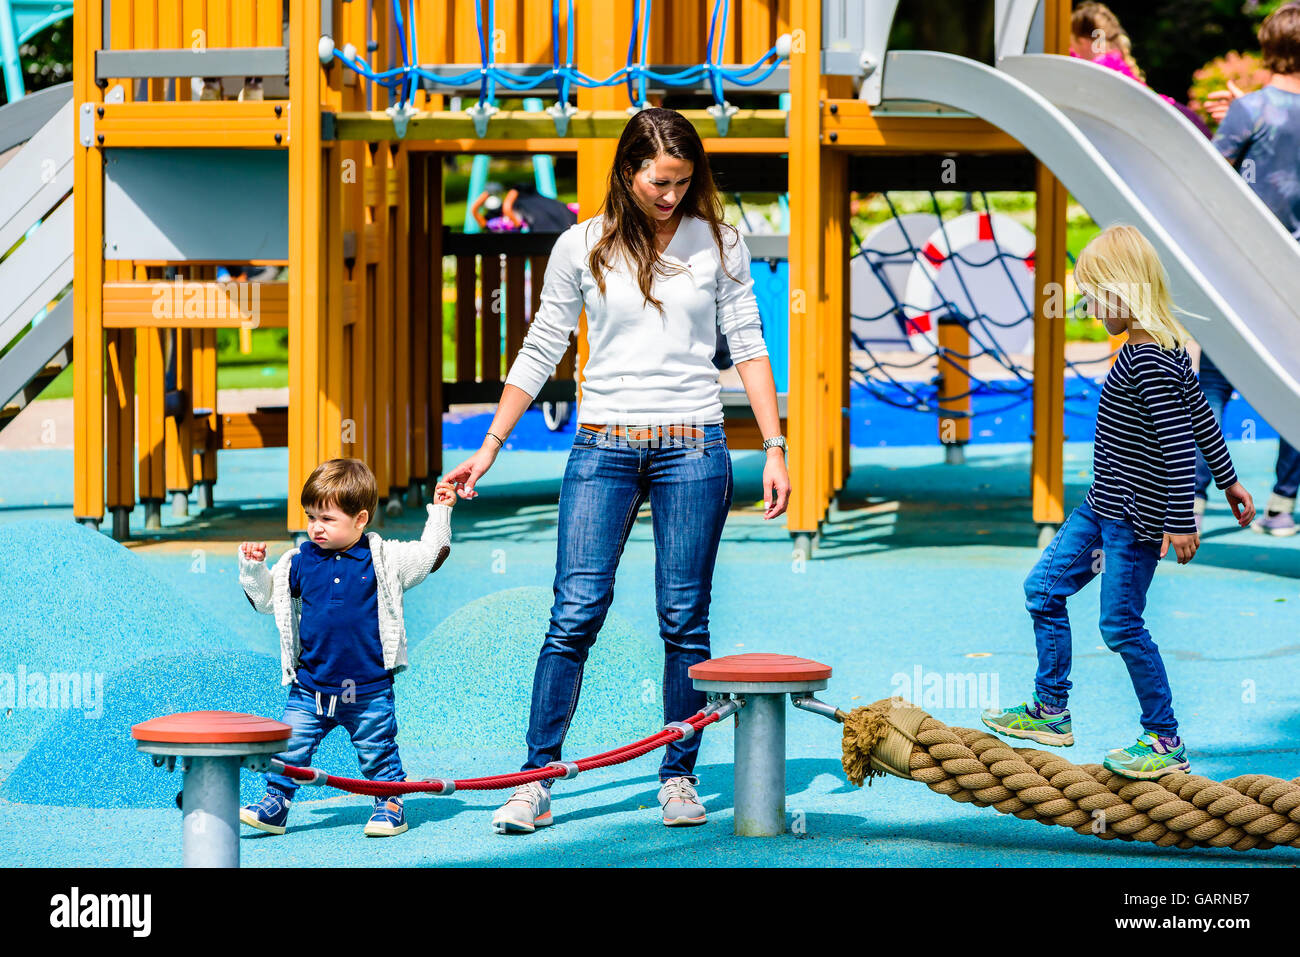 Motala, Sweden - June 21, 2016: Young adult female walking with a young boy at the playground. Possibly mother and son. Girl wal Stock Photo